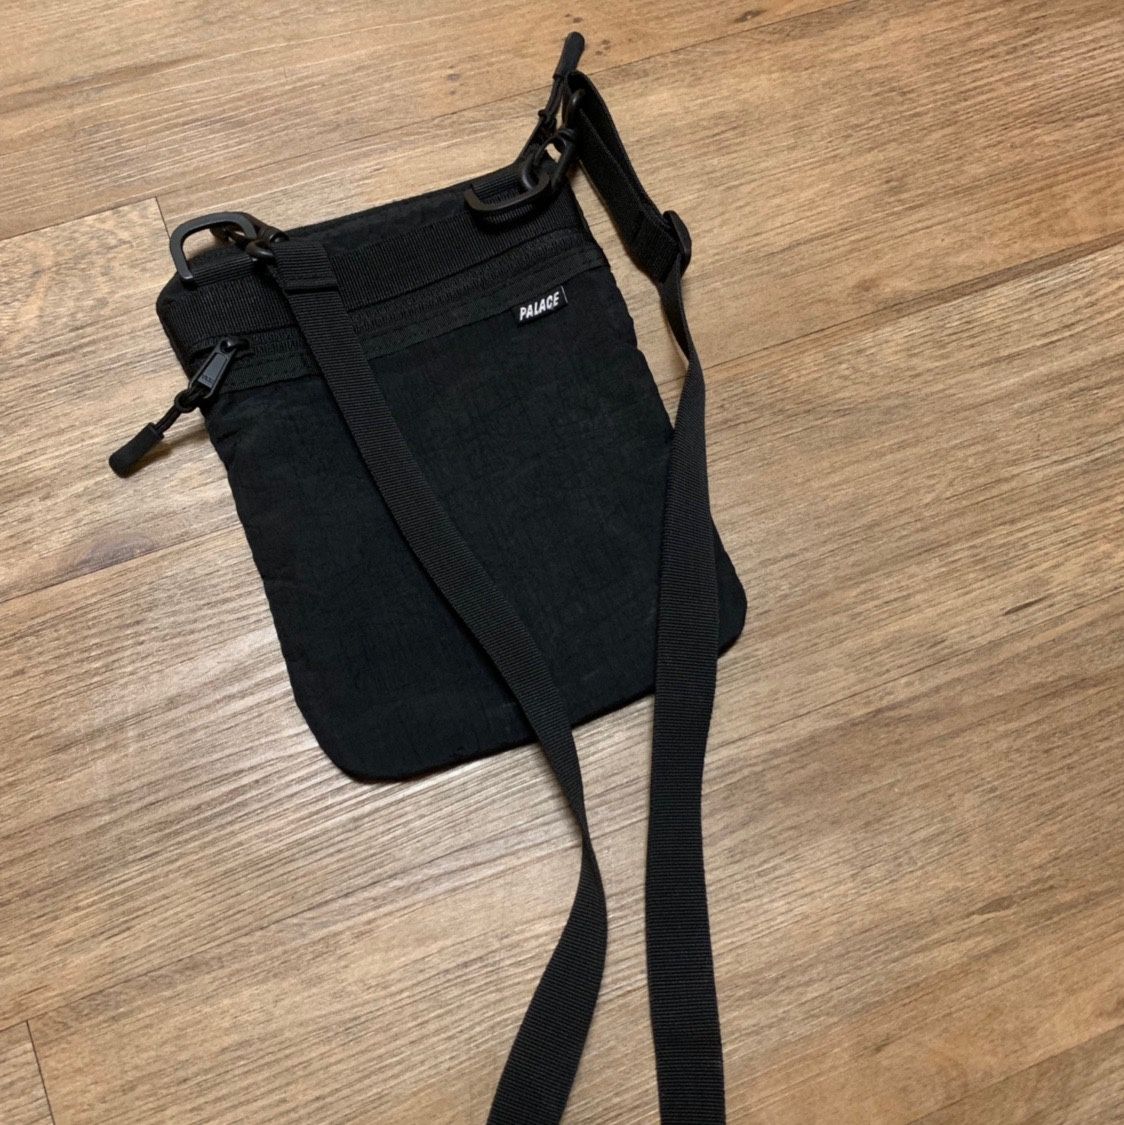 Multisac backpack for Sale in Imperial, CA - OfferUp